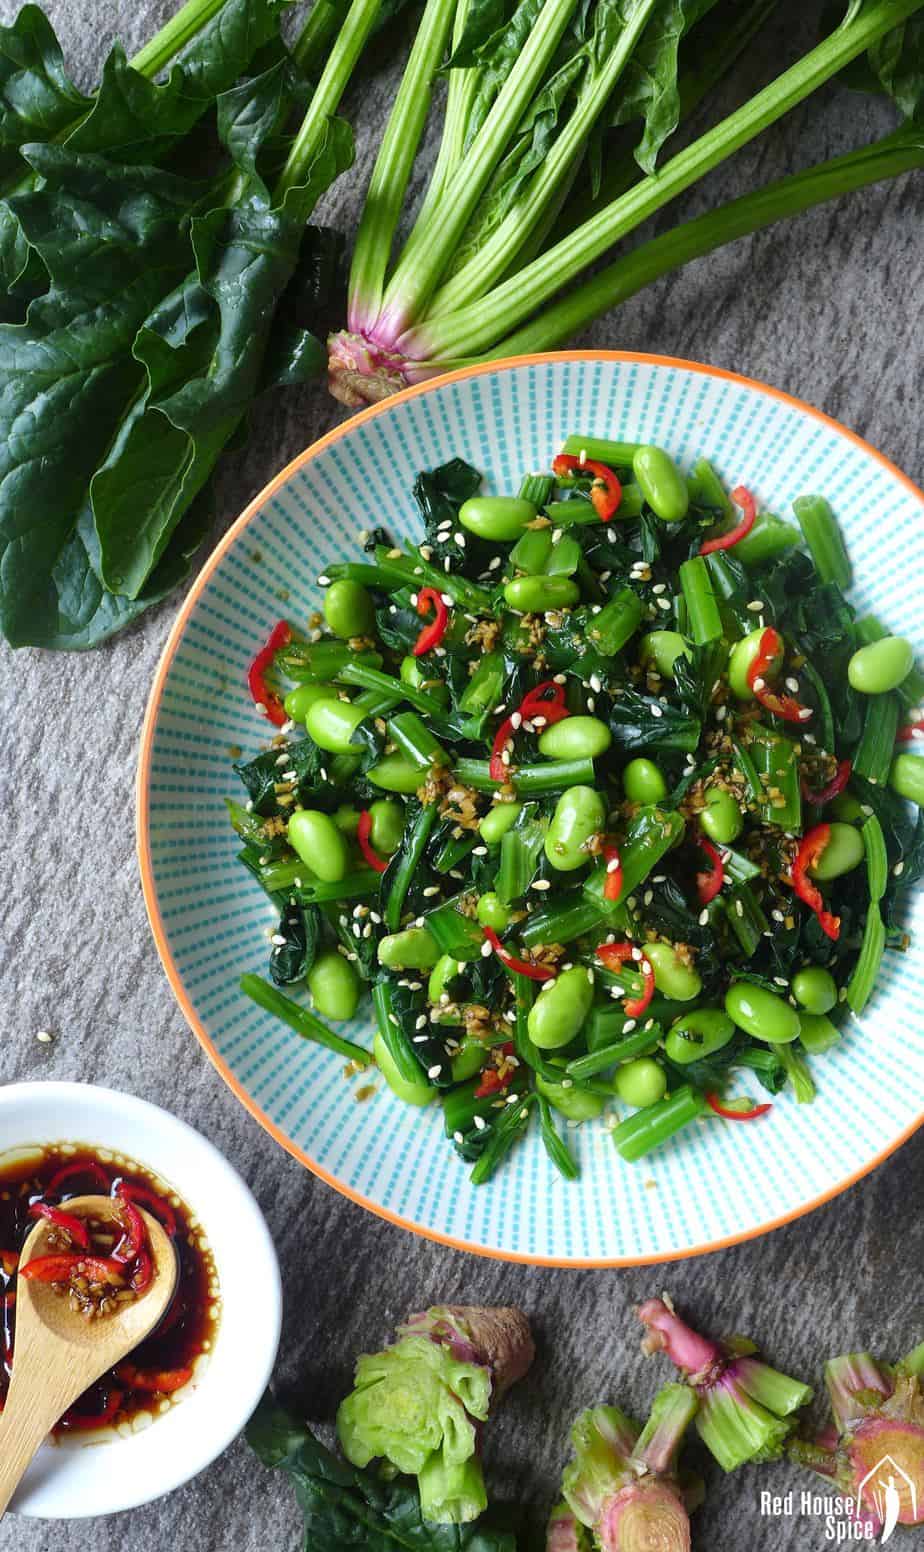 An earthy, refreshing dish loaded with nutrients, spinach and soybean salad is seasoned with a simple yet flavourful Chinese ginger dressing.